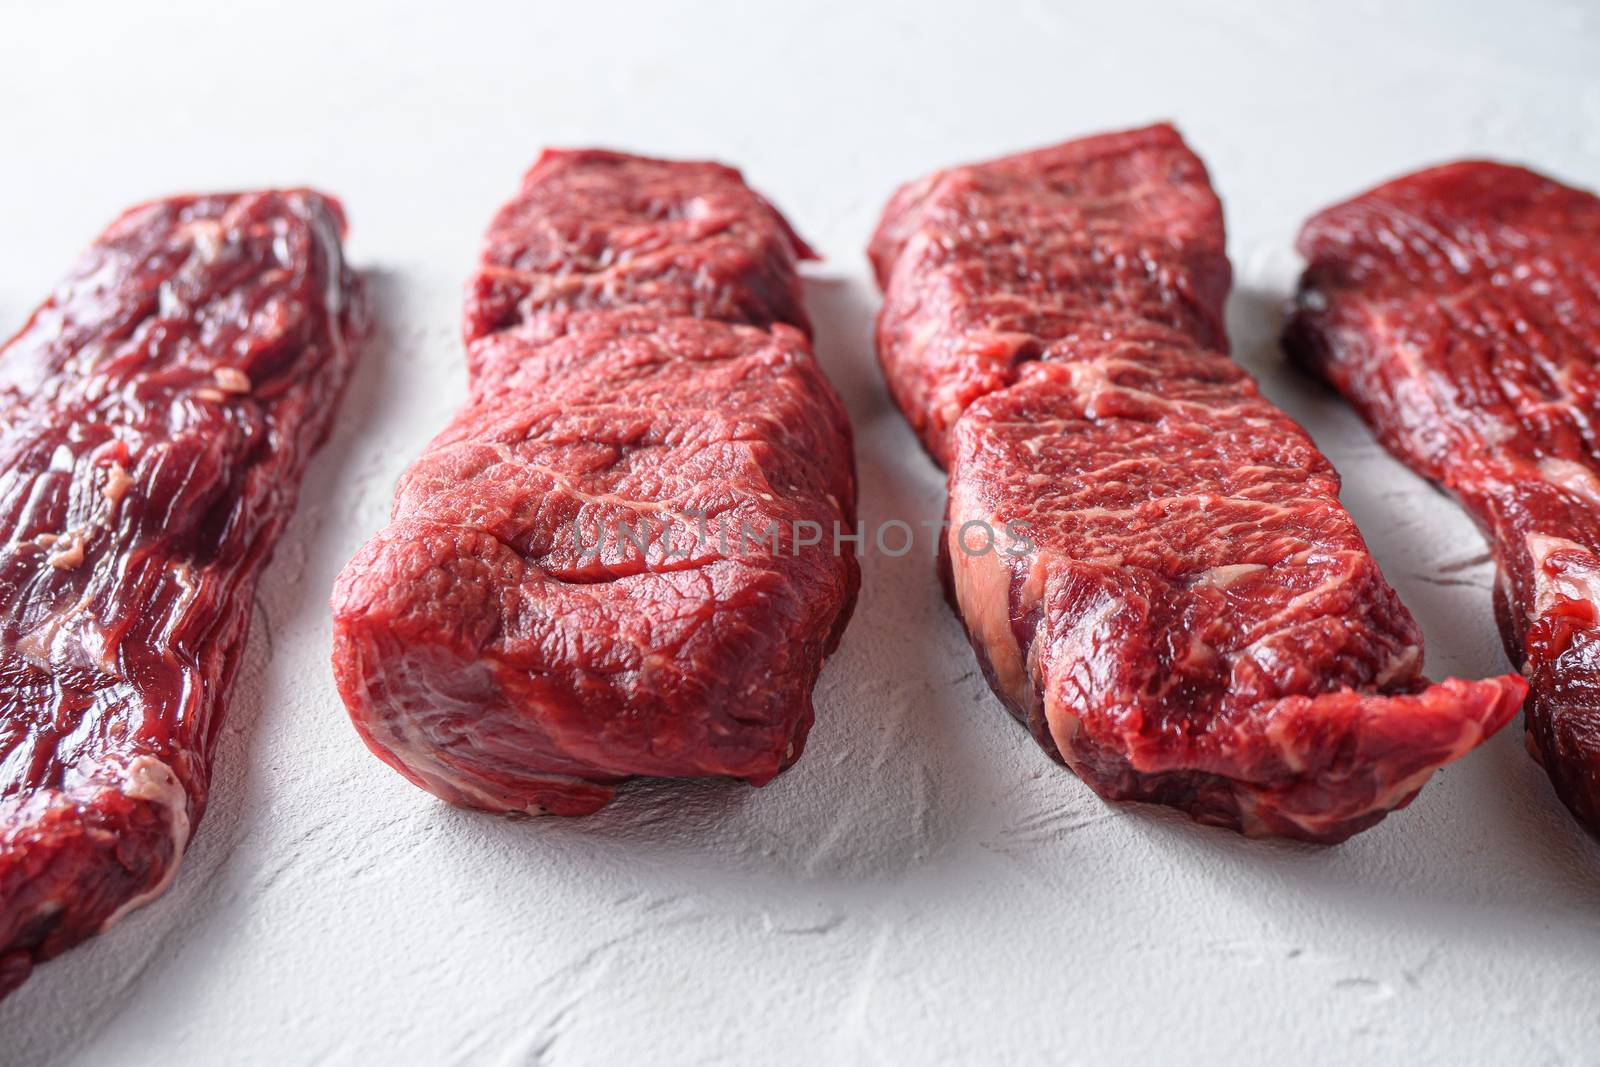 Set of denver, top blade, ranch steak , tri tip steak, machete, flank, bavette London broil marble beef on white background side view close up space view by Ilianesolenyi